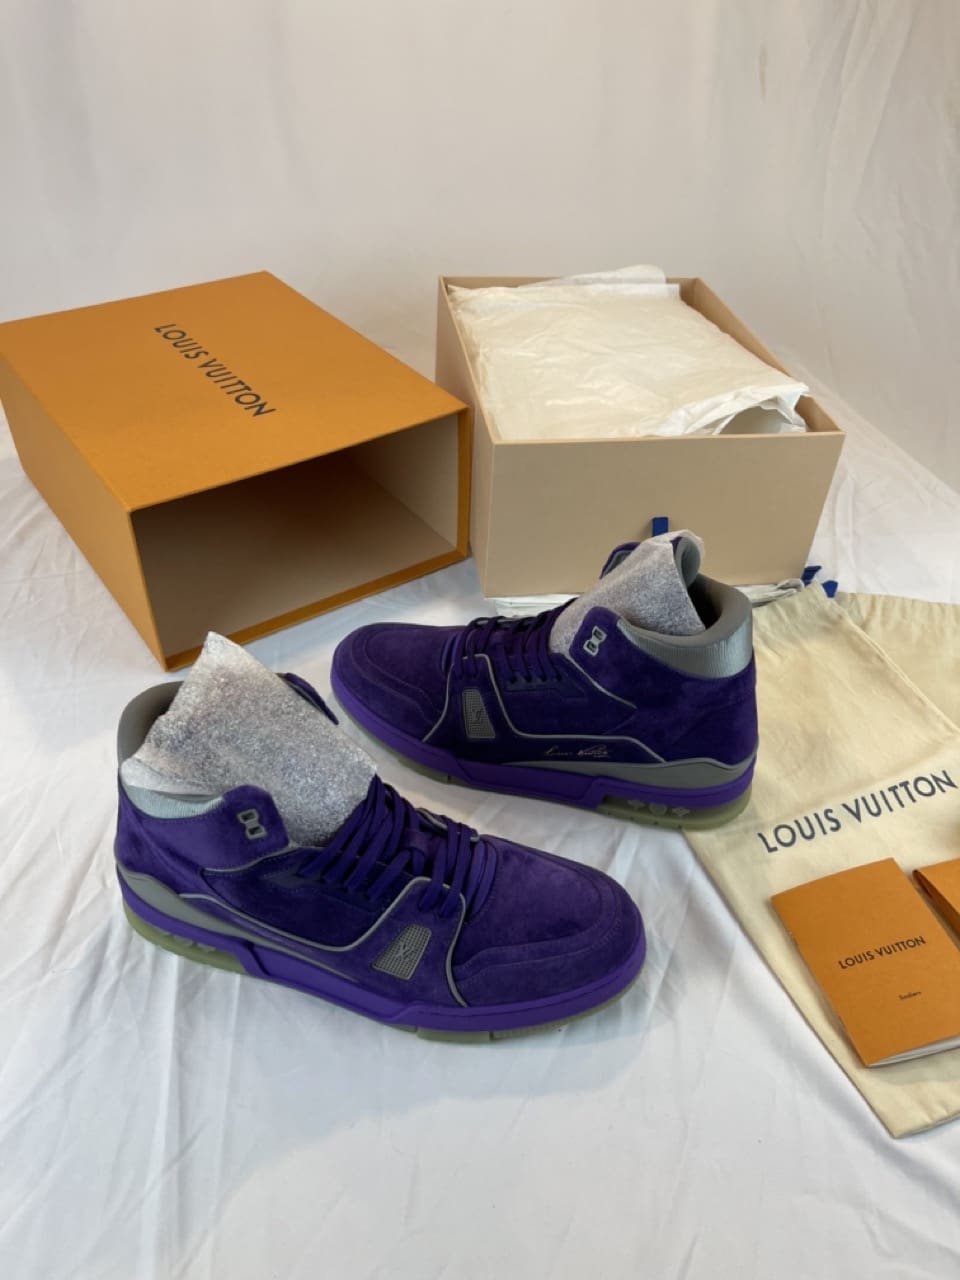 louis-vuitton trainer sneakers size 9